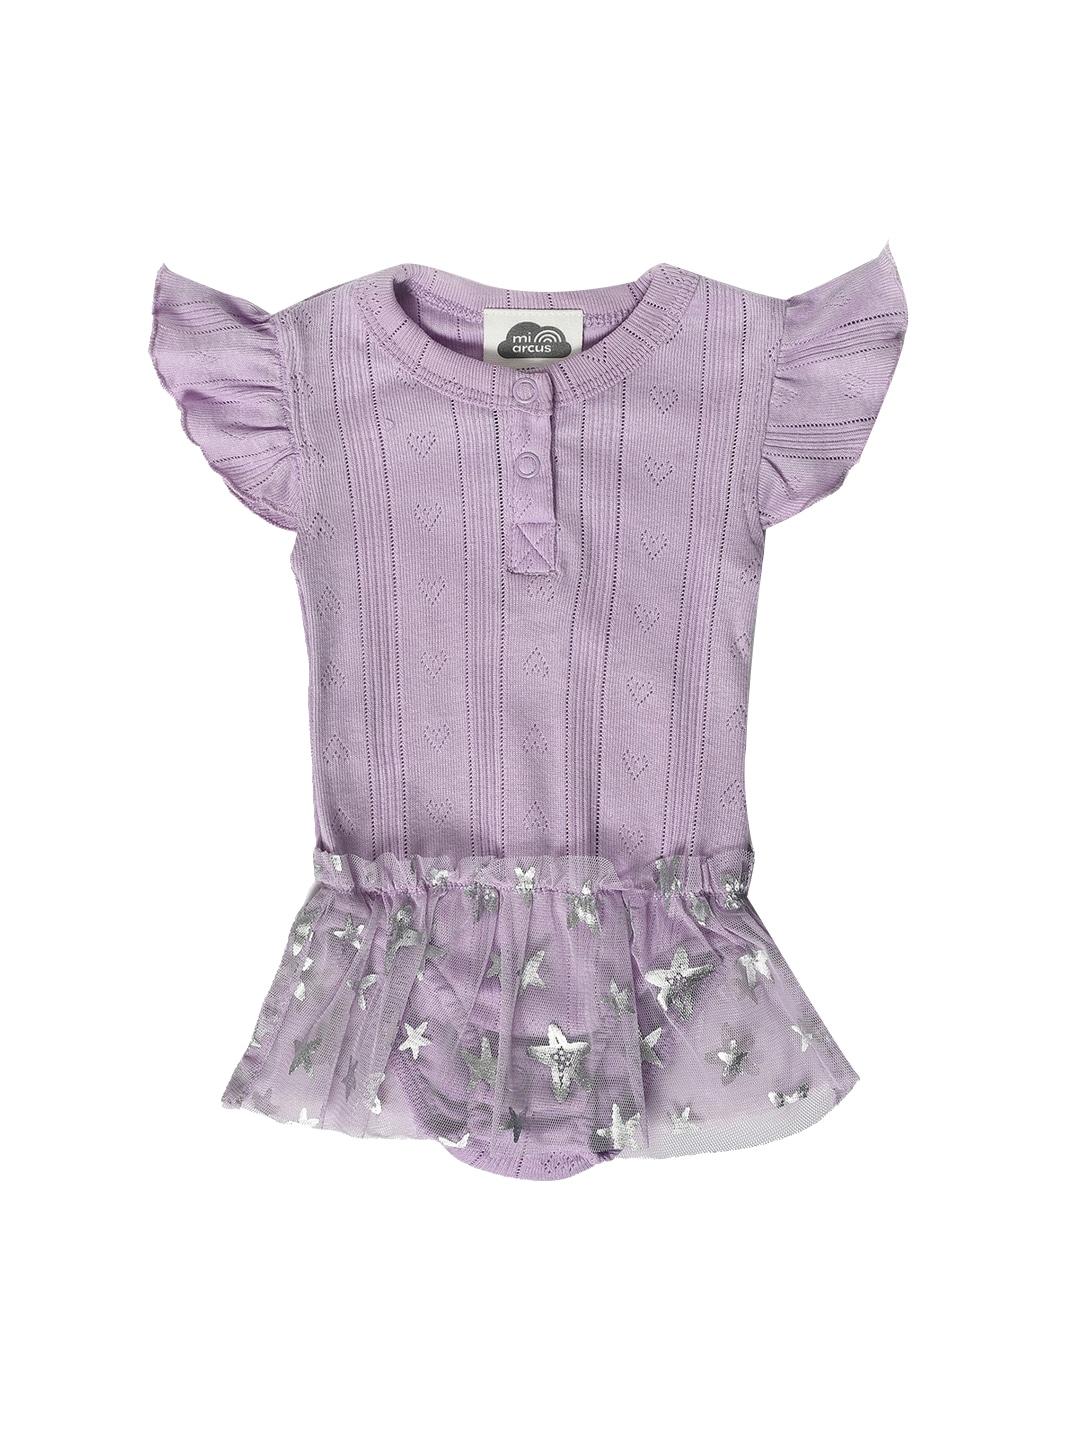 miarcus-infants-girls-pure-cotton-rompers